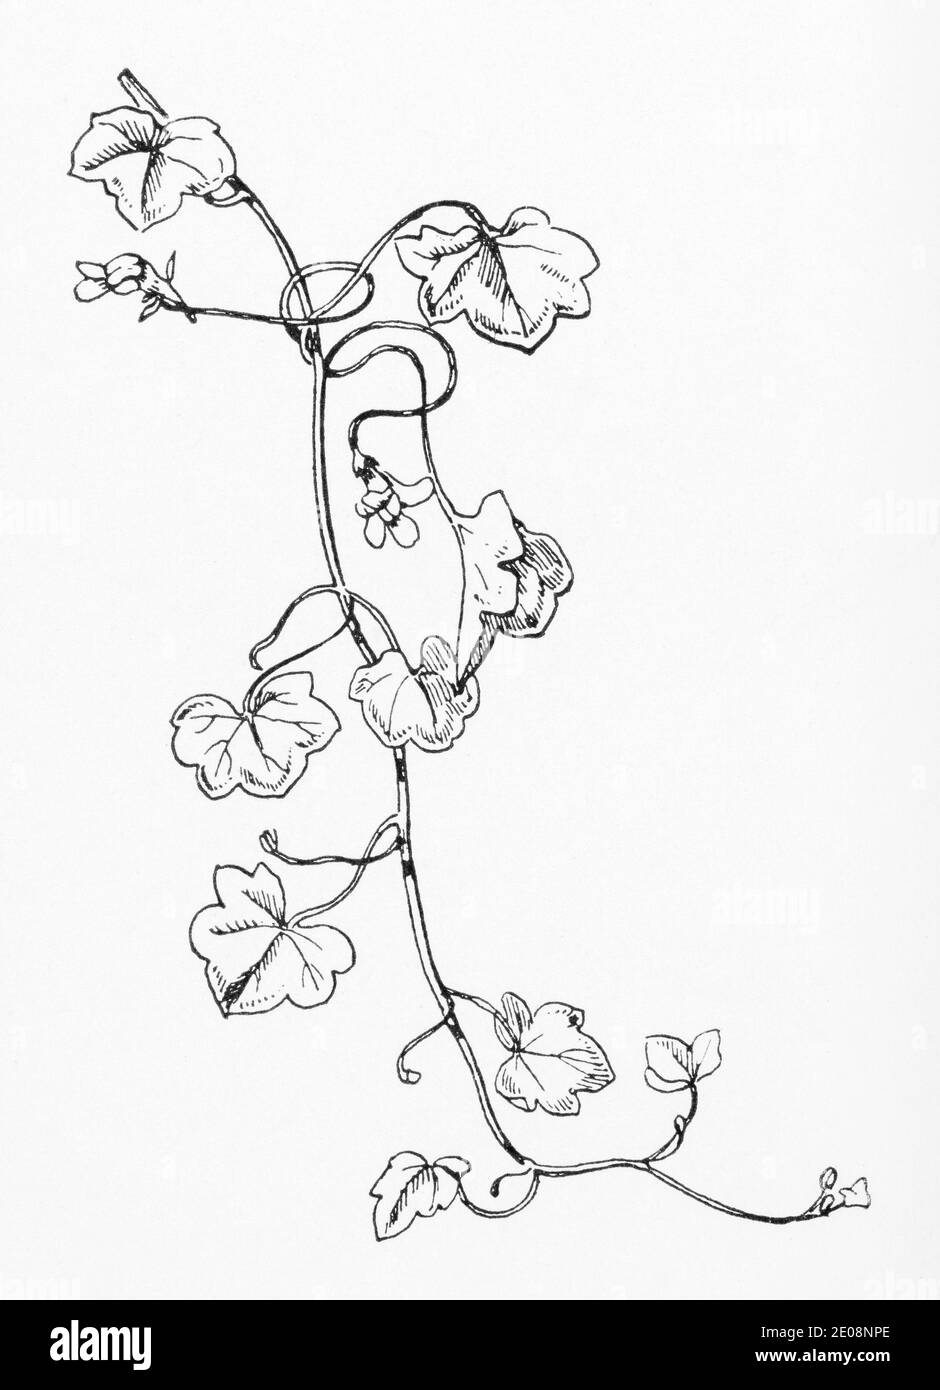 Old botanical illustration engraving of Cymbalaria muralis / Ivy-leaved Toadflax. Traditional medicinal herbal plant. See Notes Stock Photo